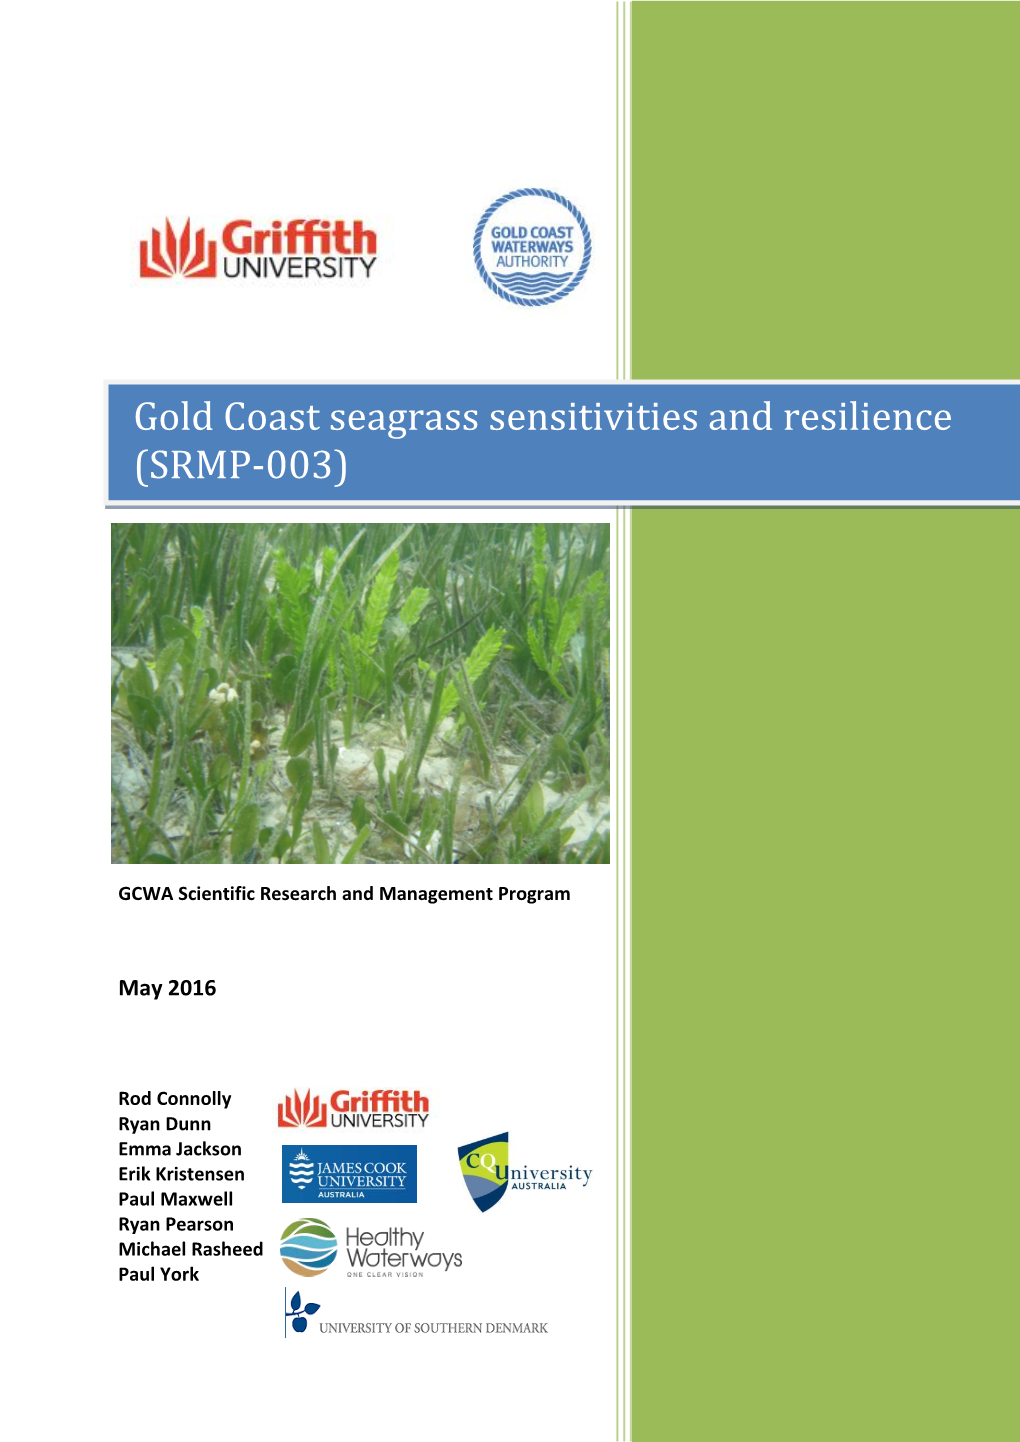 Gold Coast Seagrass Sensitivities and Resilience (SRMP-003)